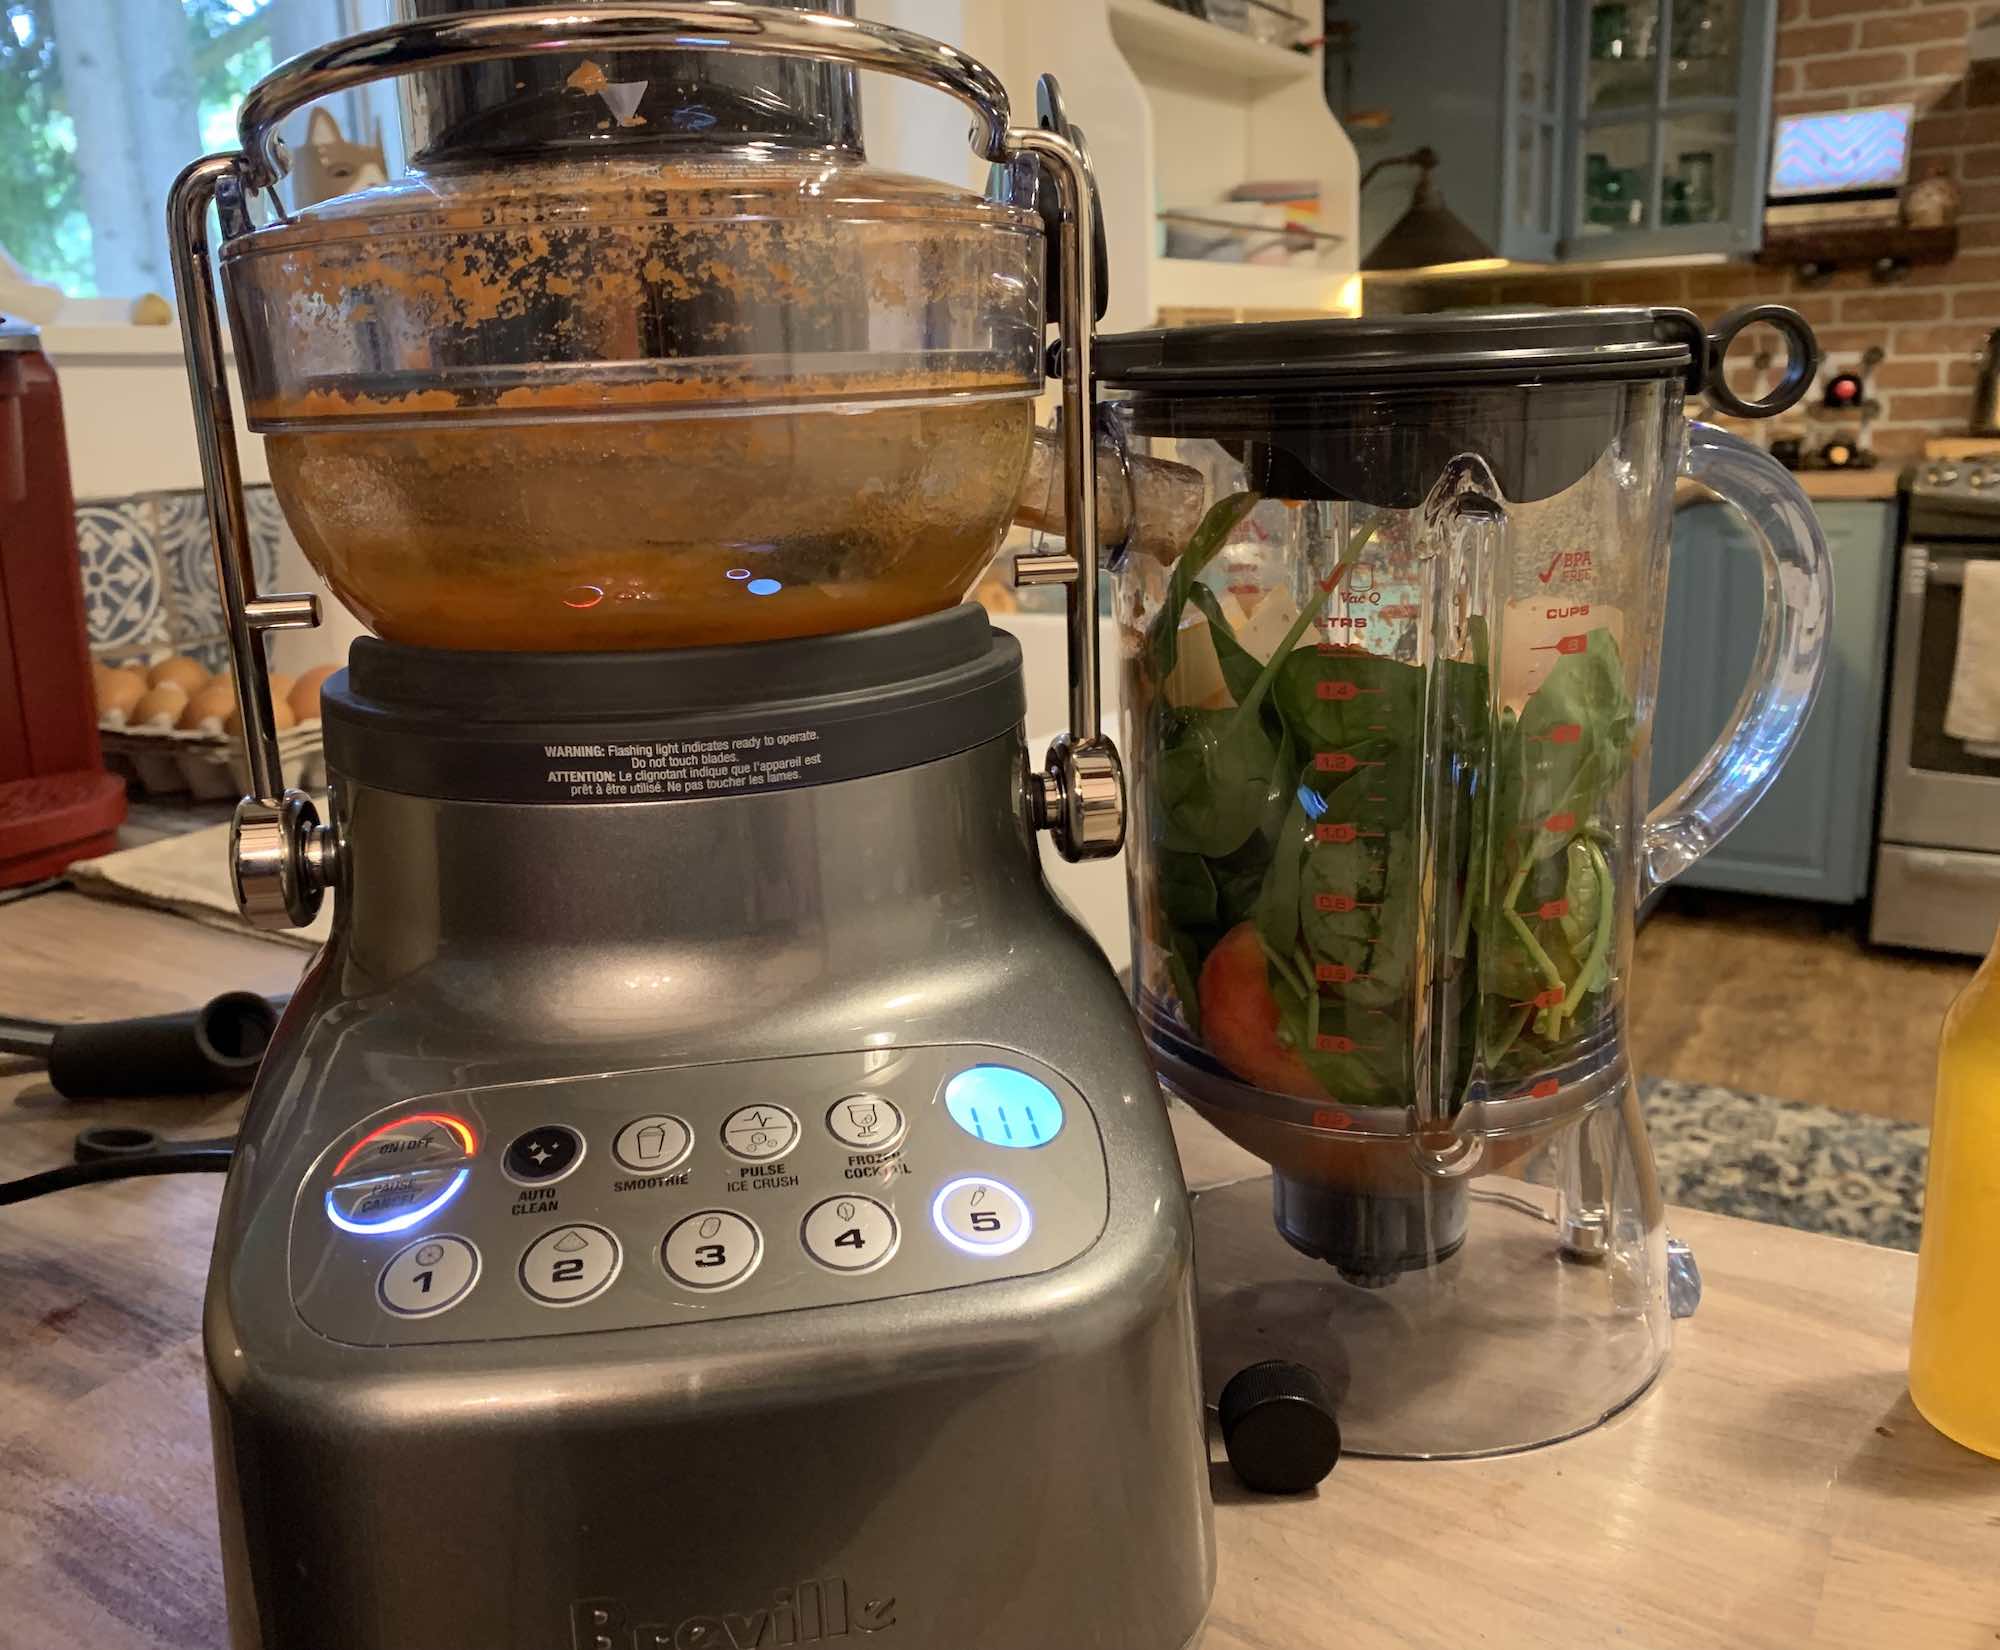 Breville the 3X Bluicer Review